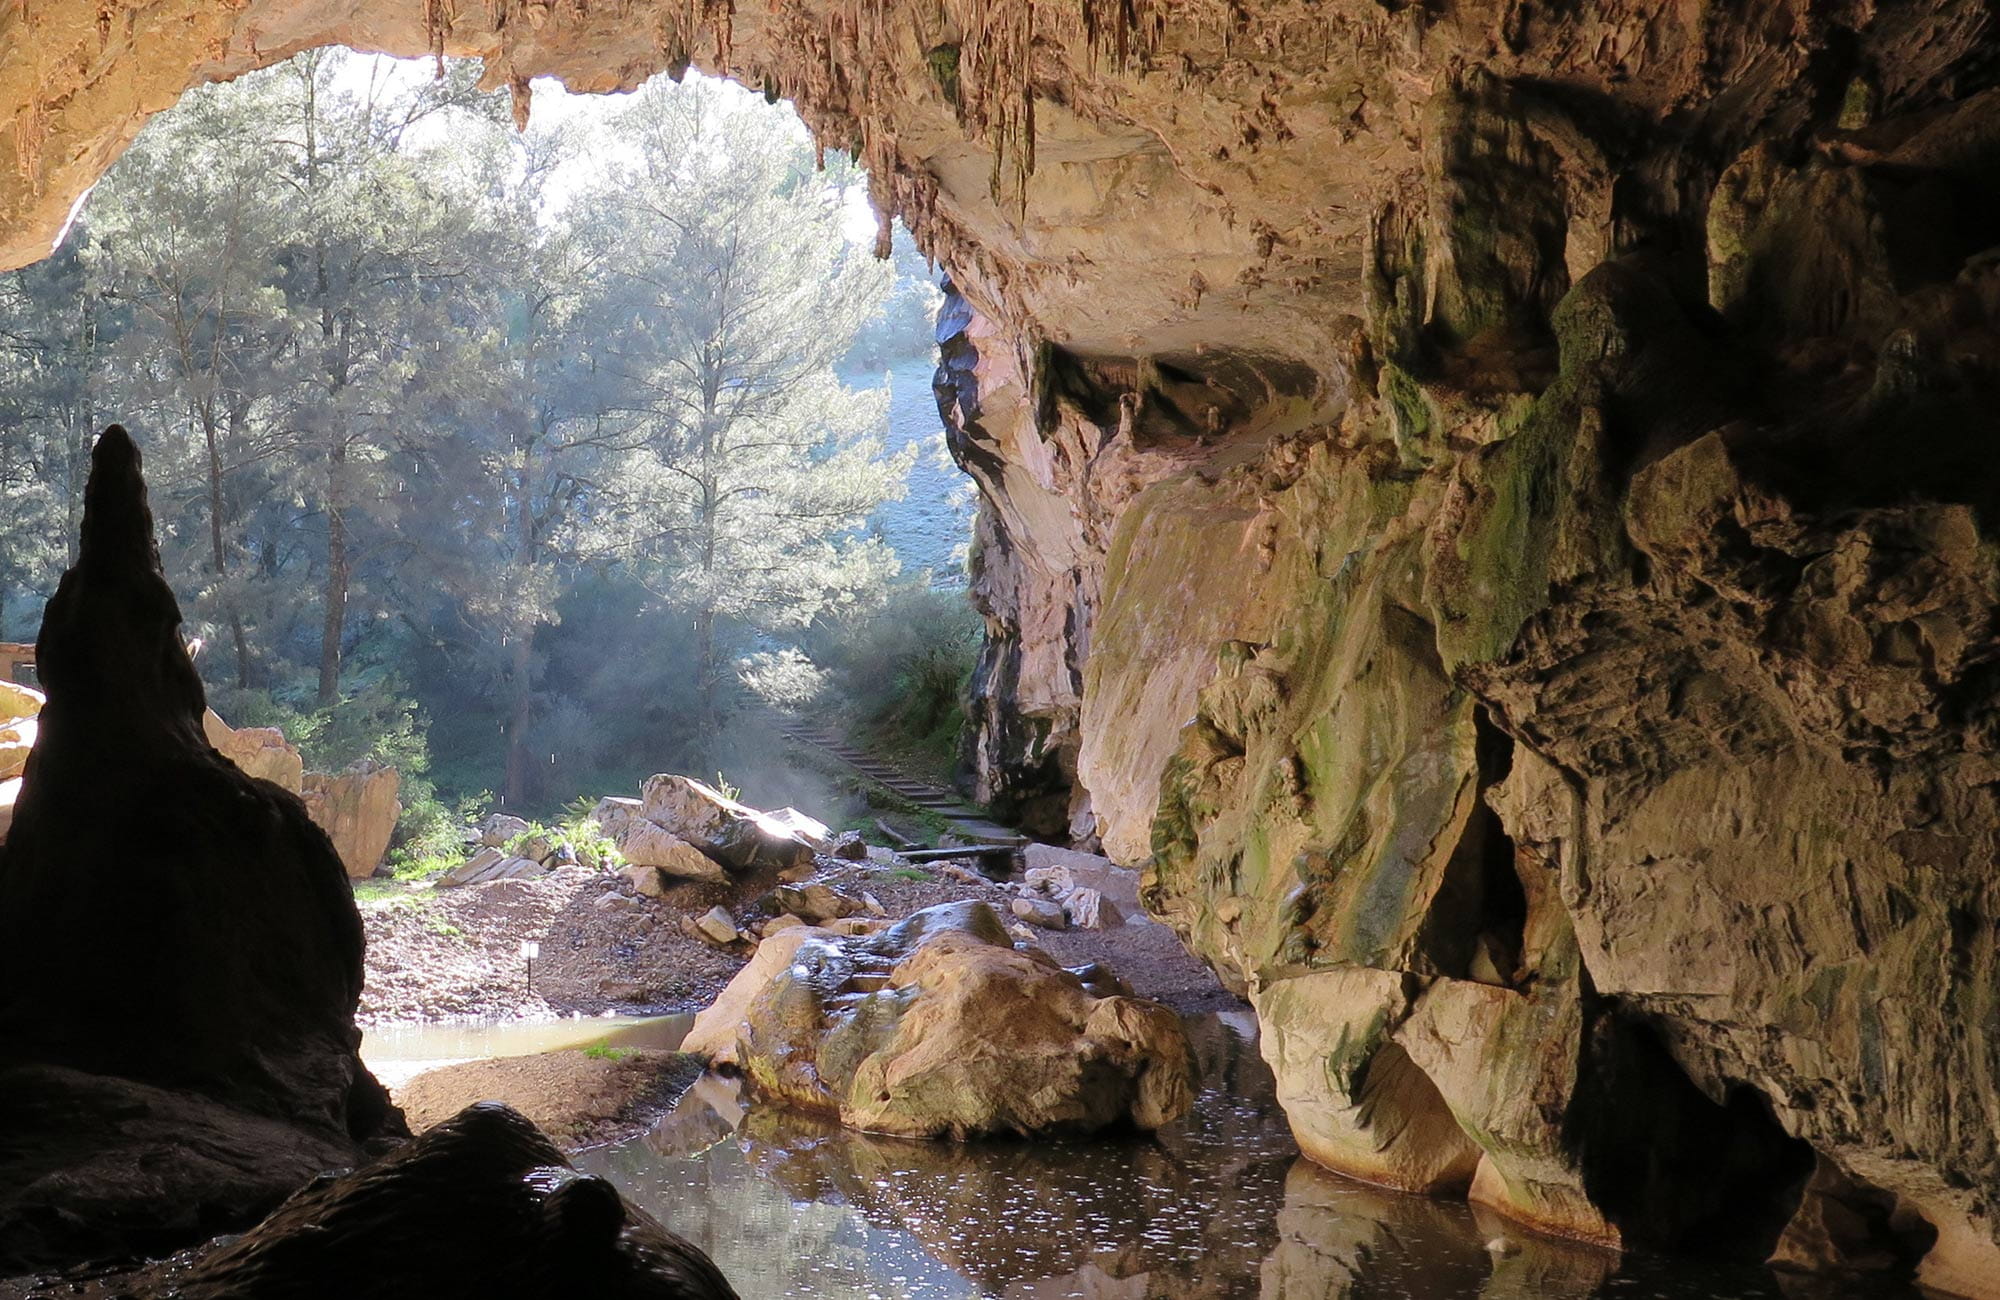 Stalagmite silhouette at entrance to Archway Cave in Abercrombie Karst Conservation Reserve. Photo: Stephen Babka/DPIE